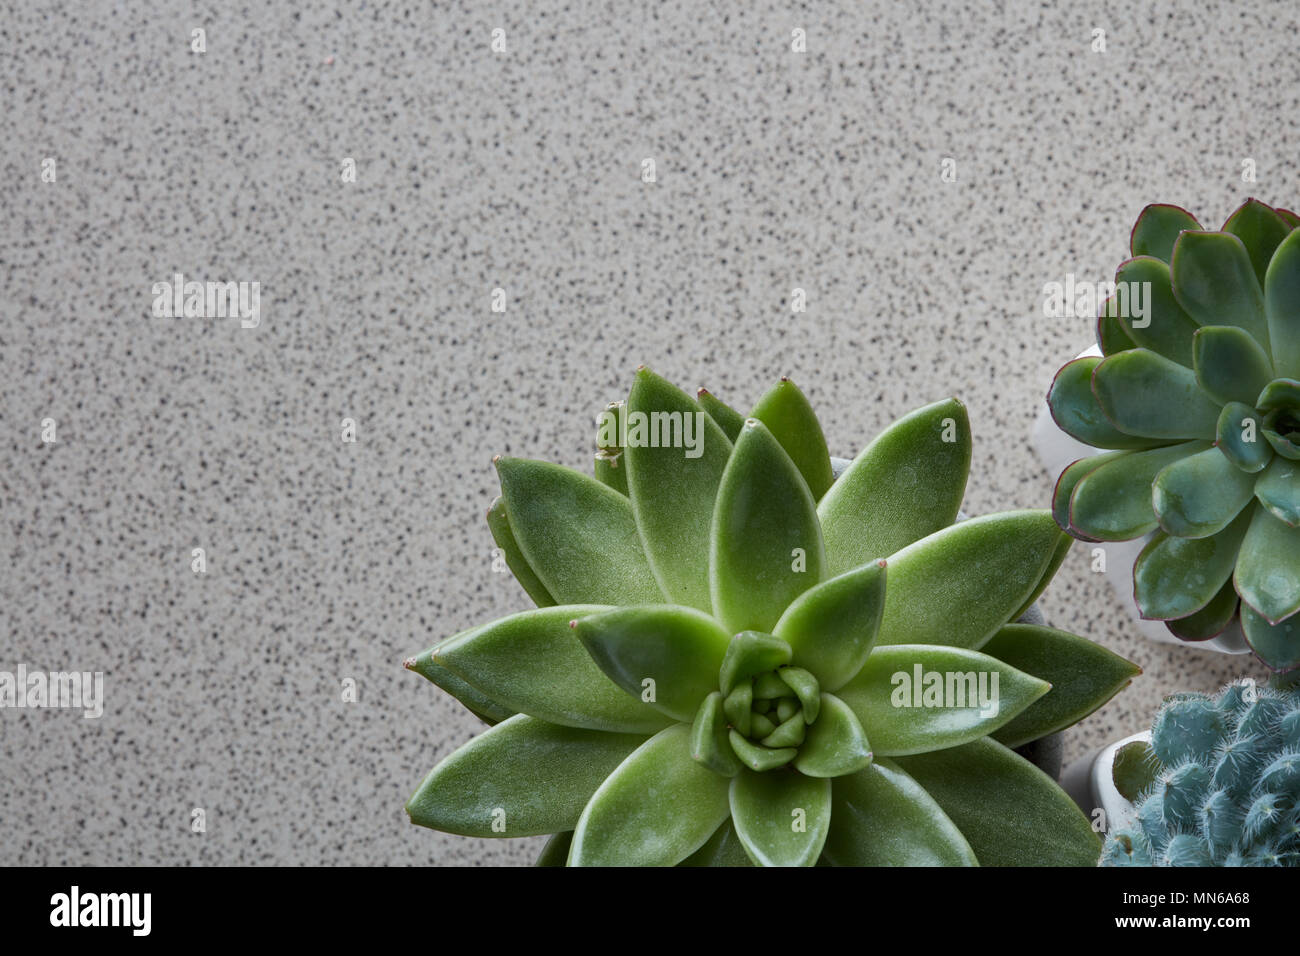 Top view of different types of Echeveria plants on a gray stone background Stock Photo